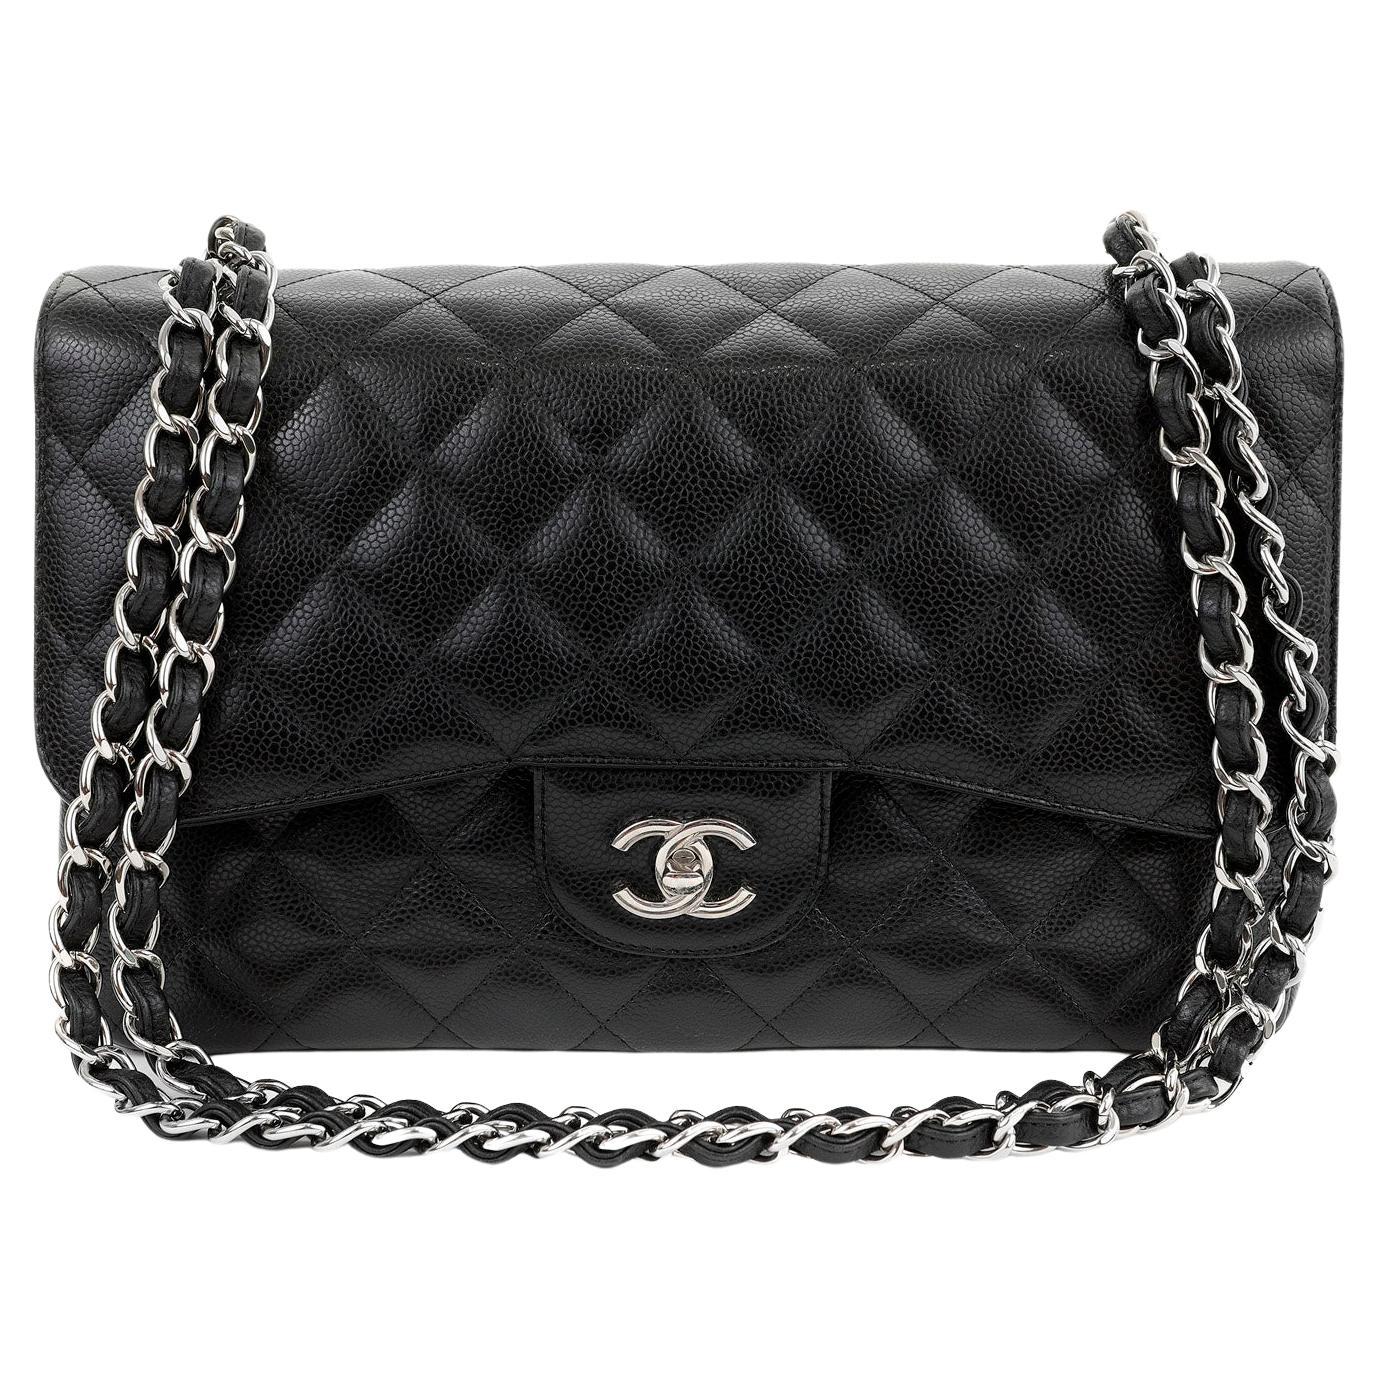 Chanel Black Caviar Jumbo Classic Flap Bag with Silver Hardware For Sale